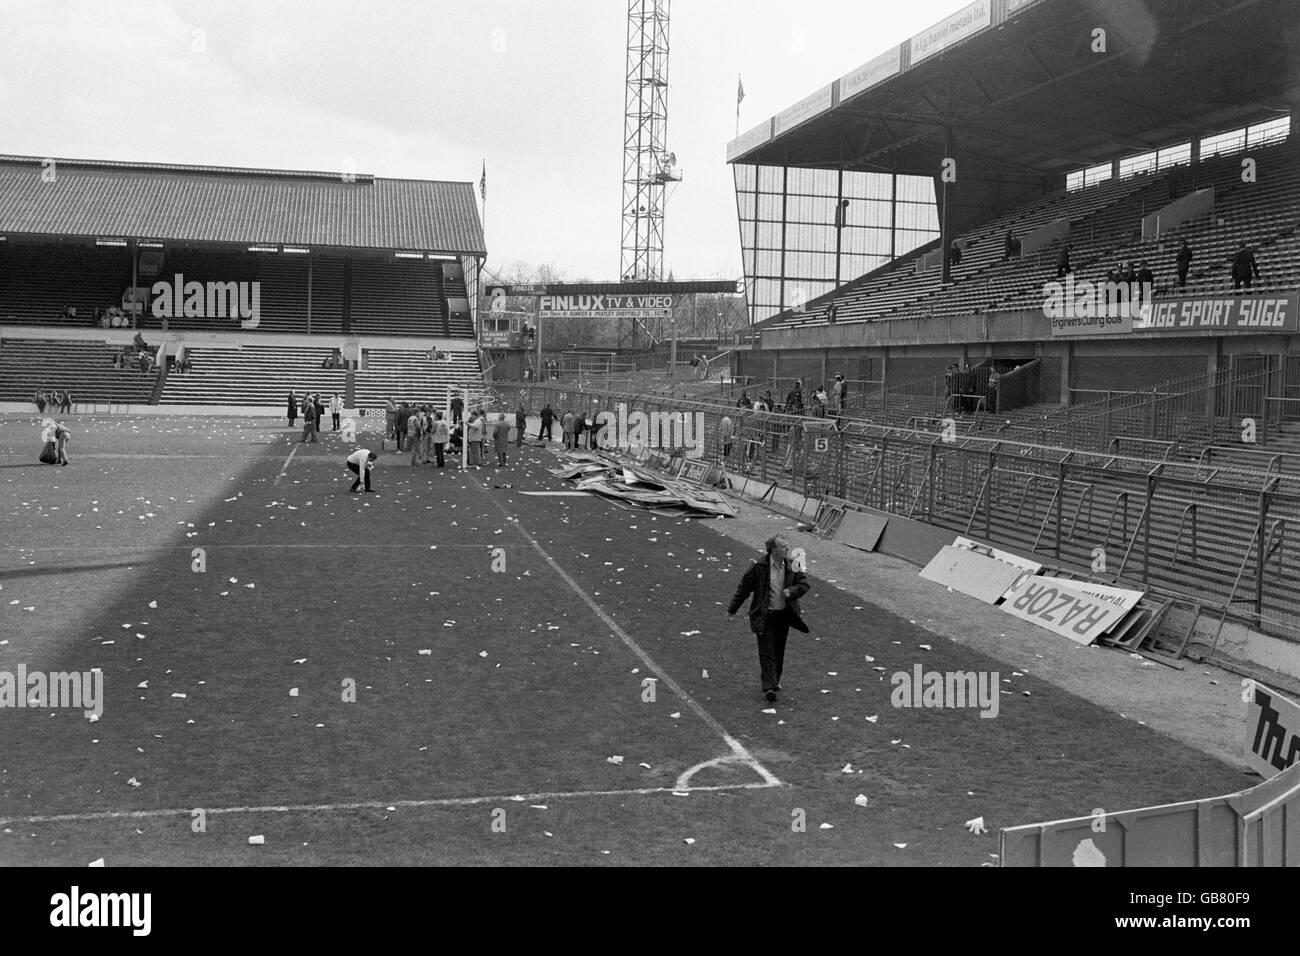 Bent and twisted fencing at Hillsborough in the aftermath of the tragedy. More than 90 people died and 170 injured after over-crowding caused a crush in the stand. Stock Photo